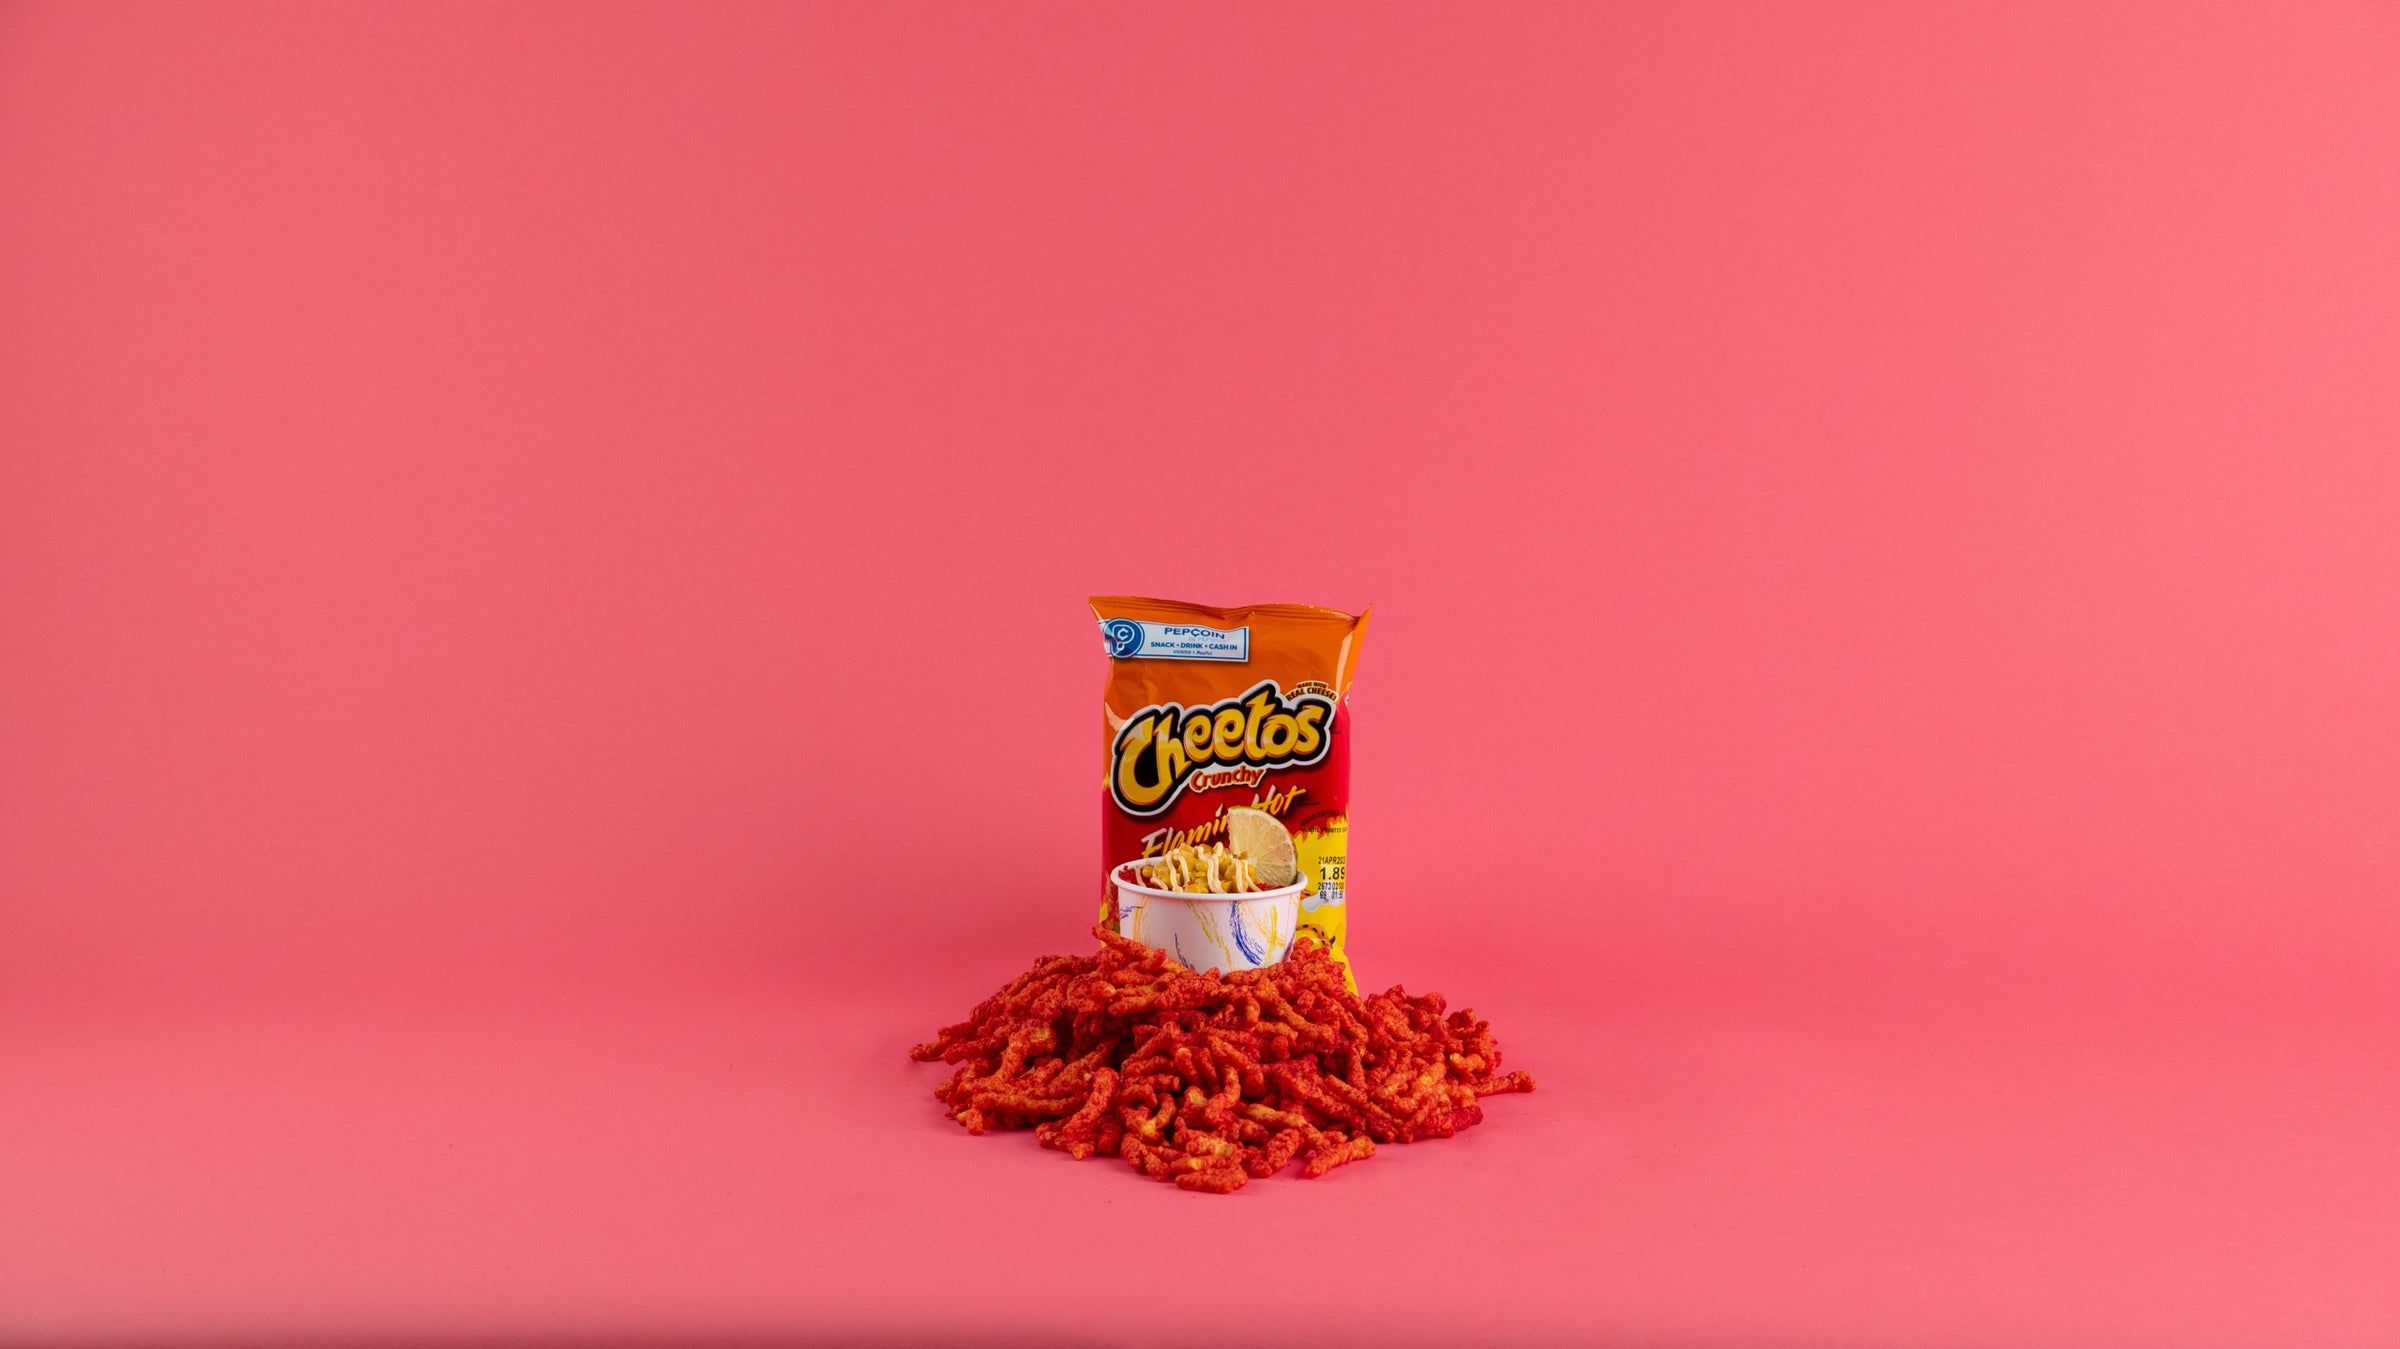 A bag of Fritos corn chips on a pink background - Cheetos